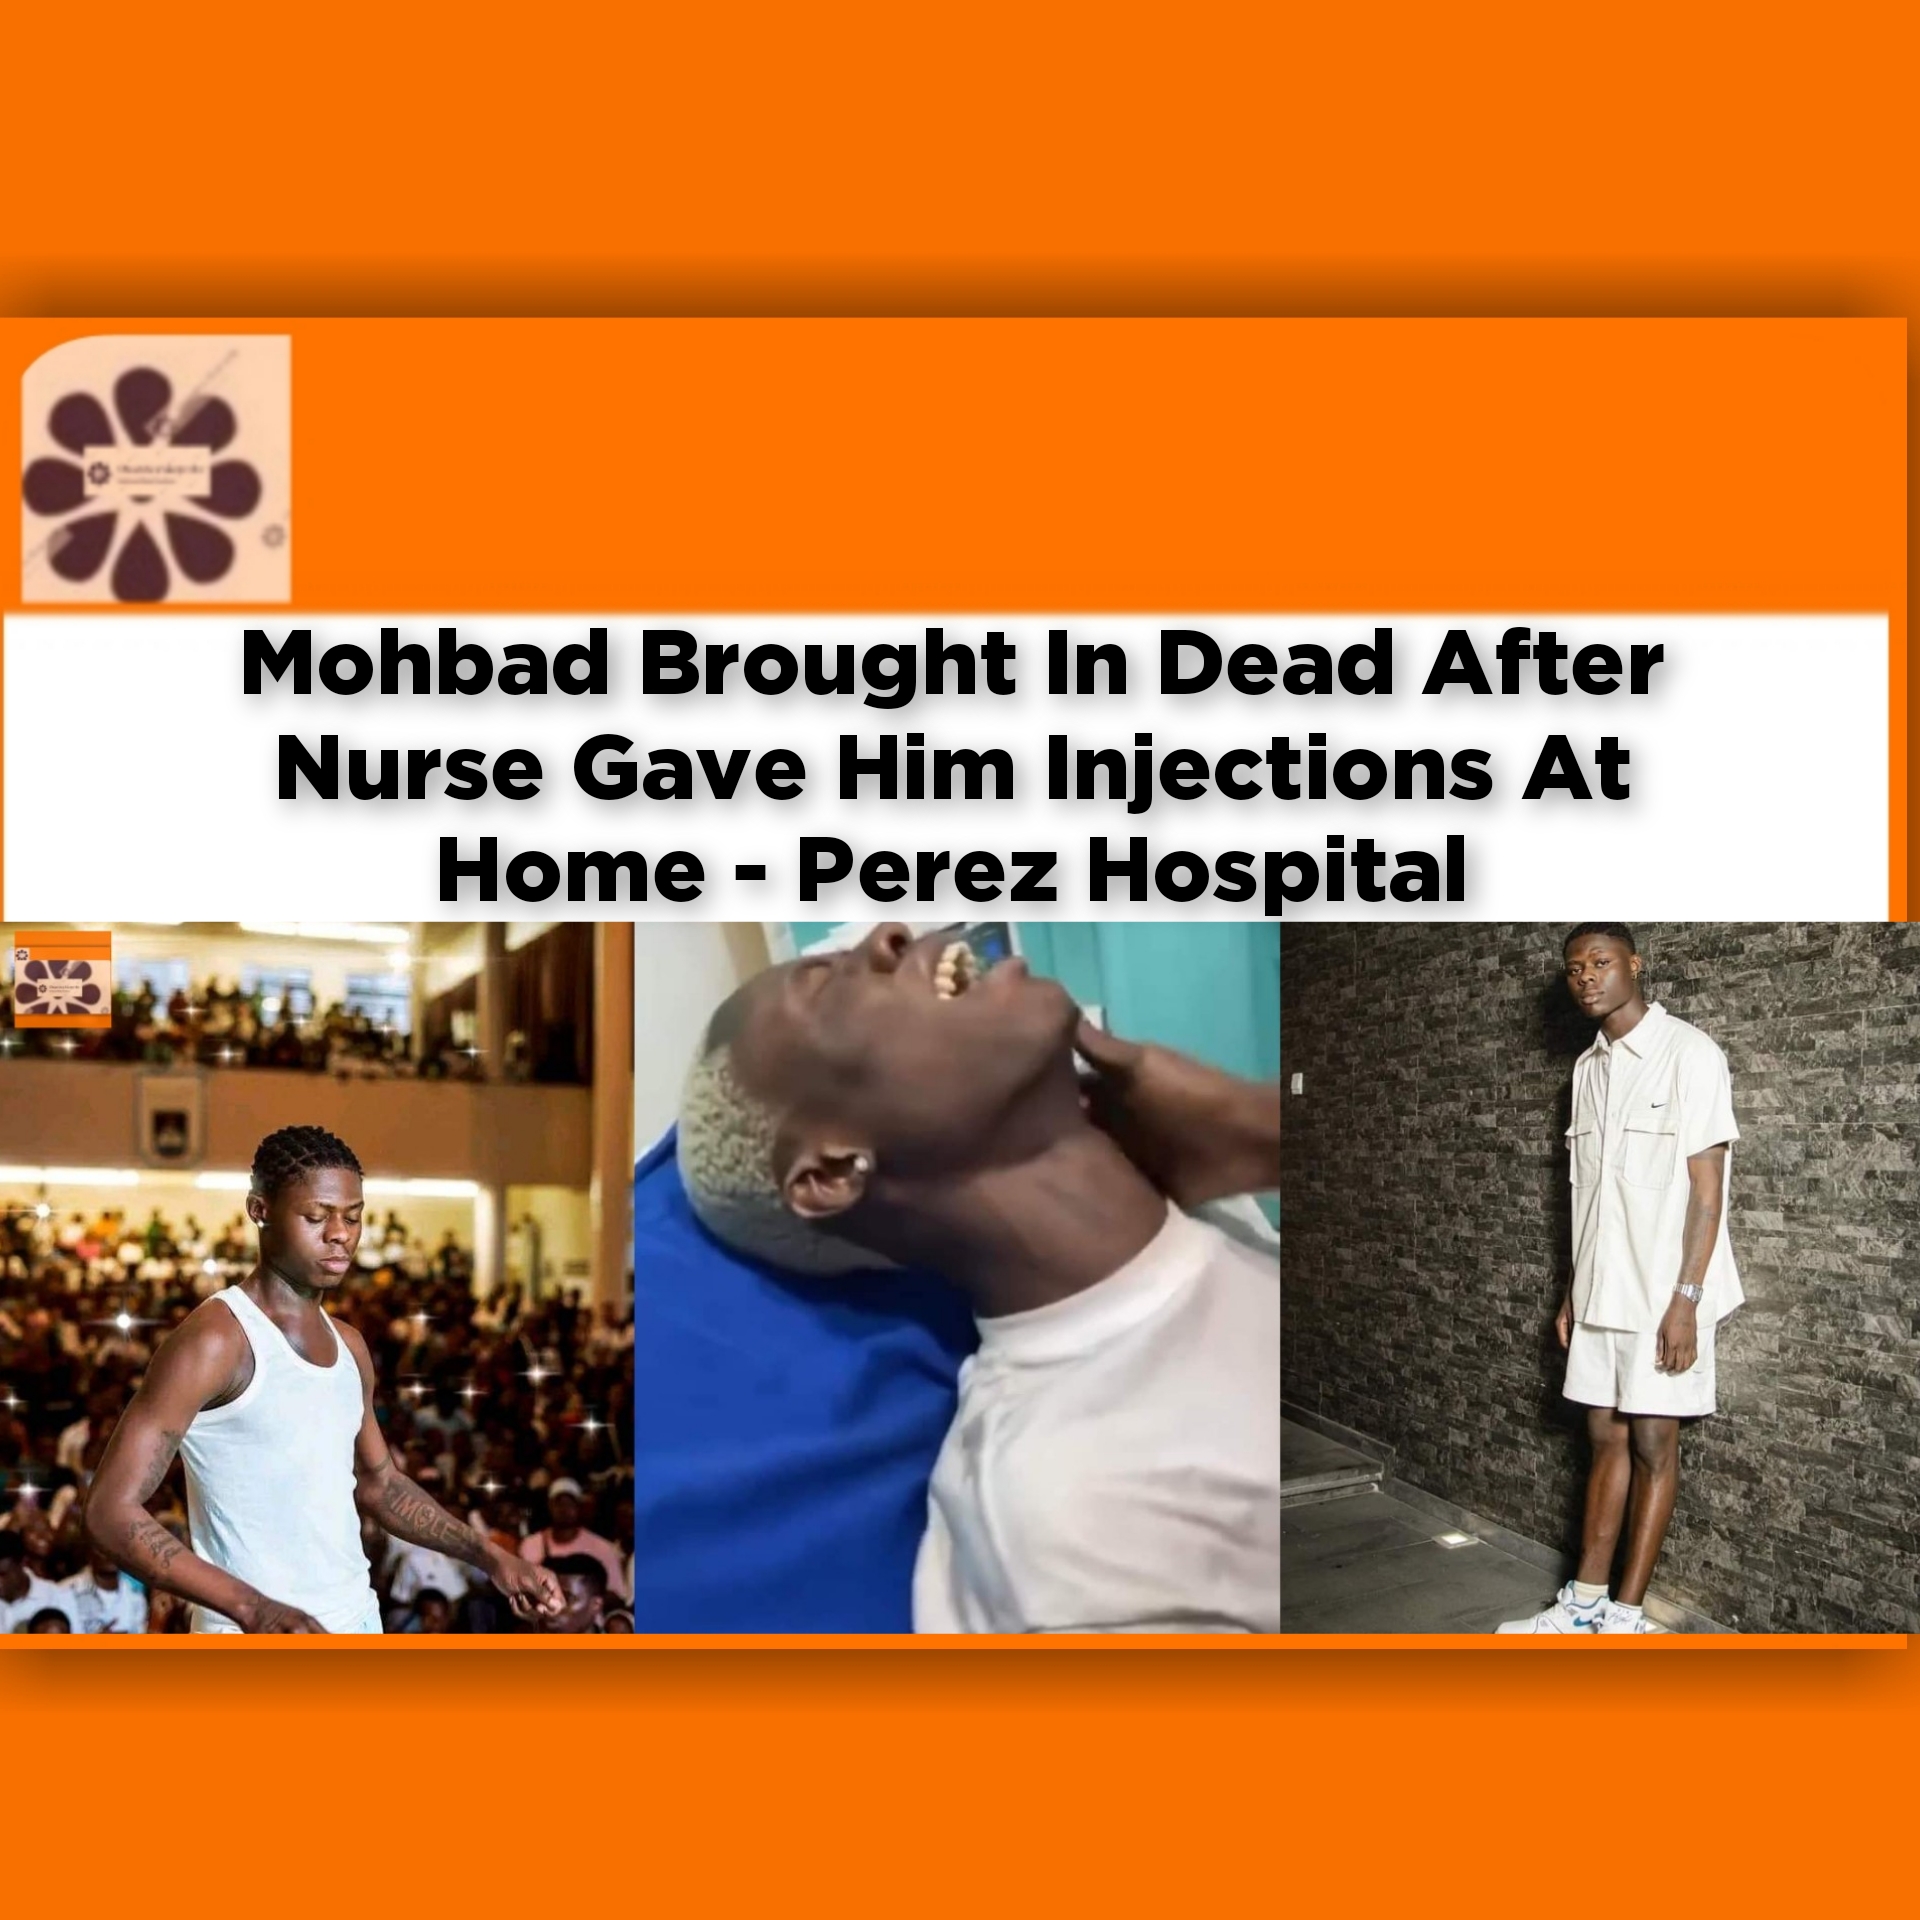 Mohbad Brought In Dead After Nurse Gave Him Injections At Home - Perez Hospital ~ OsazuwaAkonedo news